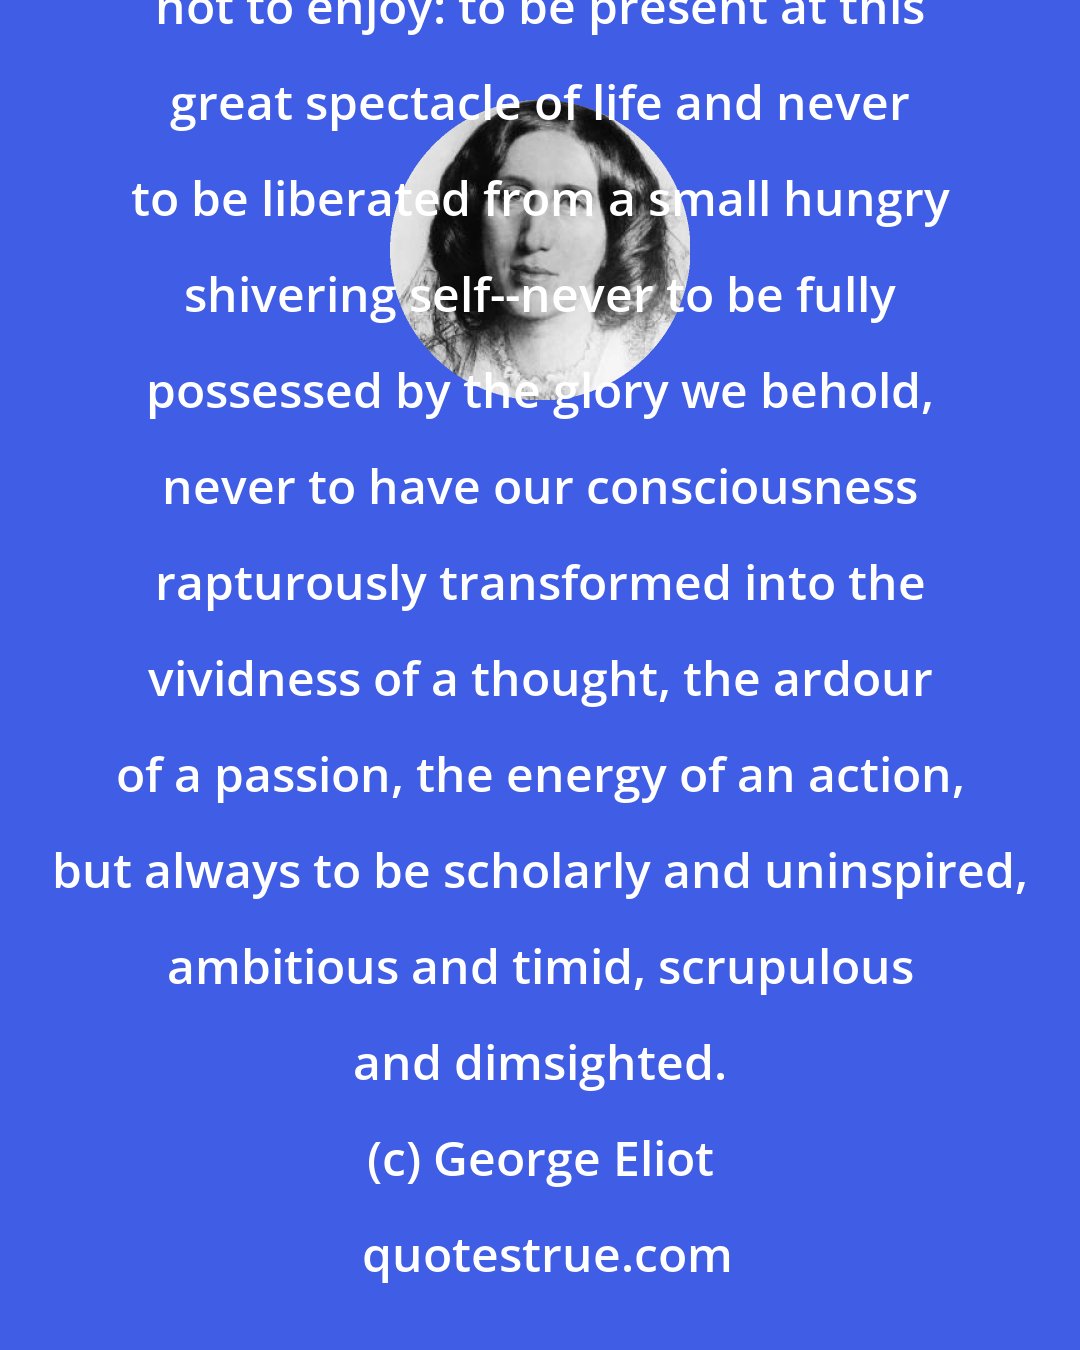 George Eliot: For my part I am very sorry for him. It is an uneasy lot at best, to be what we call highly taught and yet not to enjoy: to be present at this great spectacle of life and never to be liberated from a small hungry shivering self--never to be fully possessed by the glory we behold, never to have our consciousness rapturously transformed into the vividness of a thought, the ardour of a passion, the energy of an action, but always to be scholarly and uninspired, ambitious and timid, scrupulous and dimsighted.